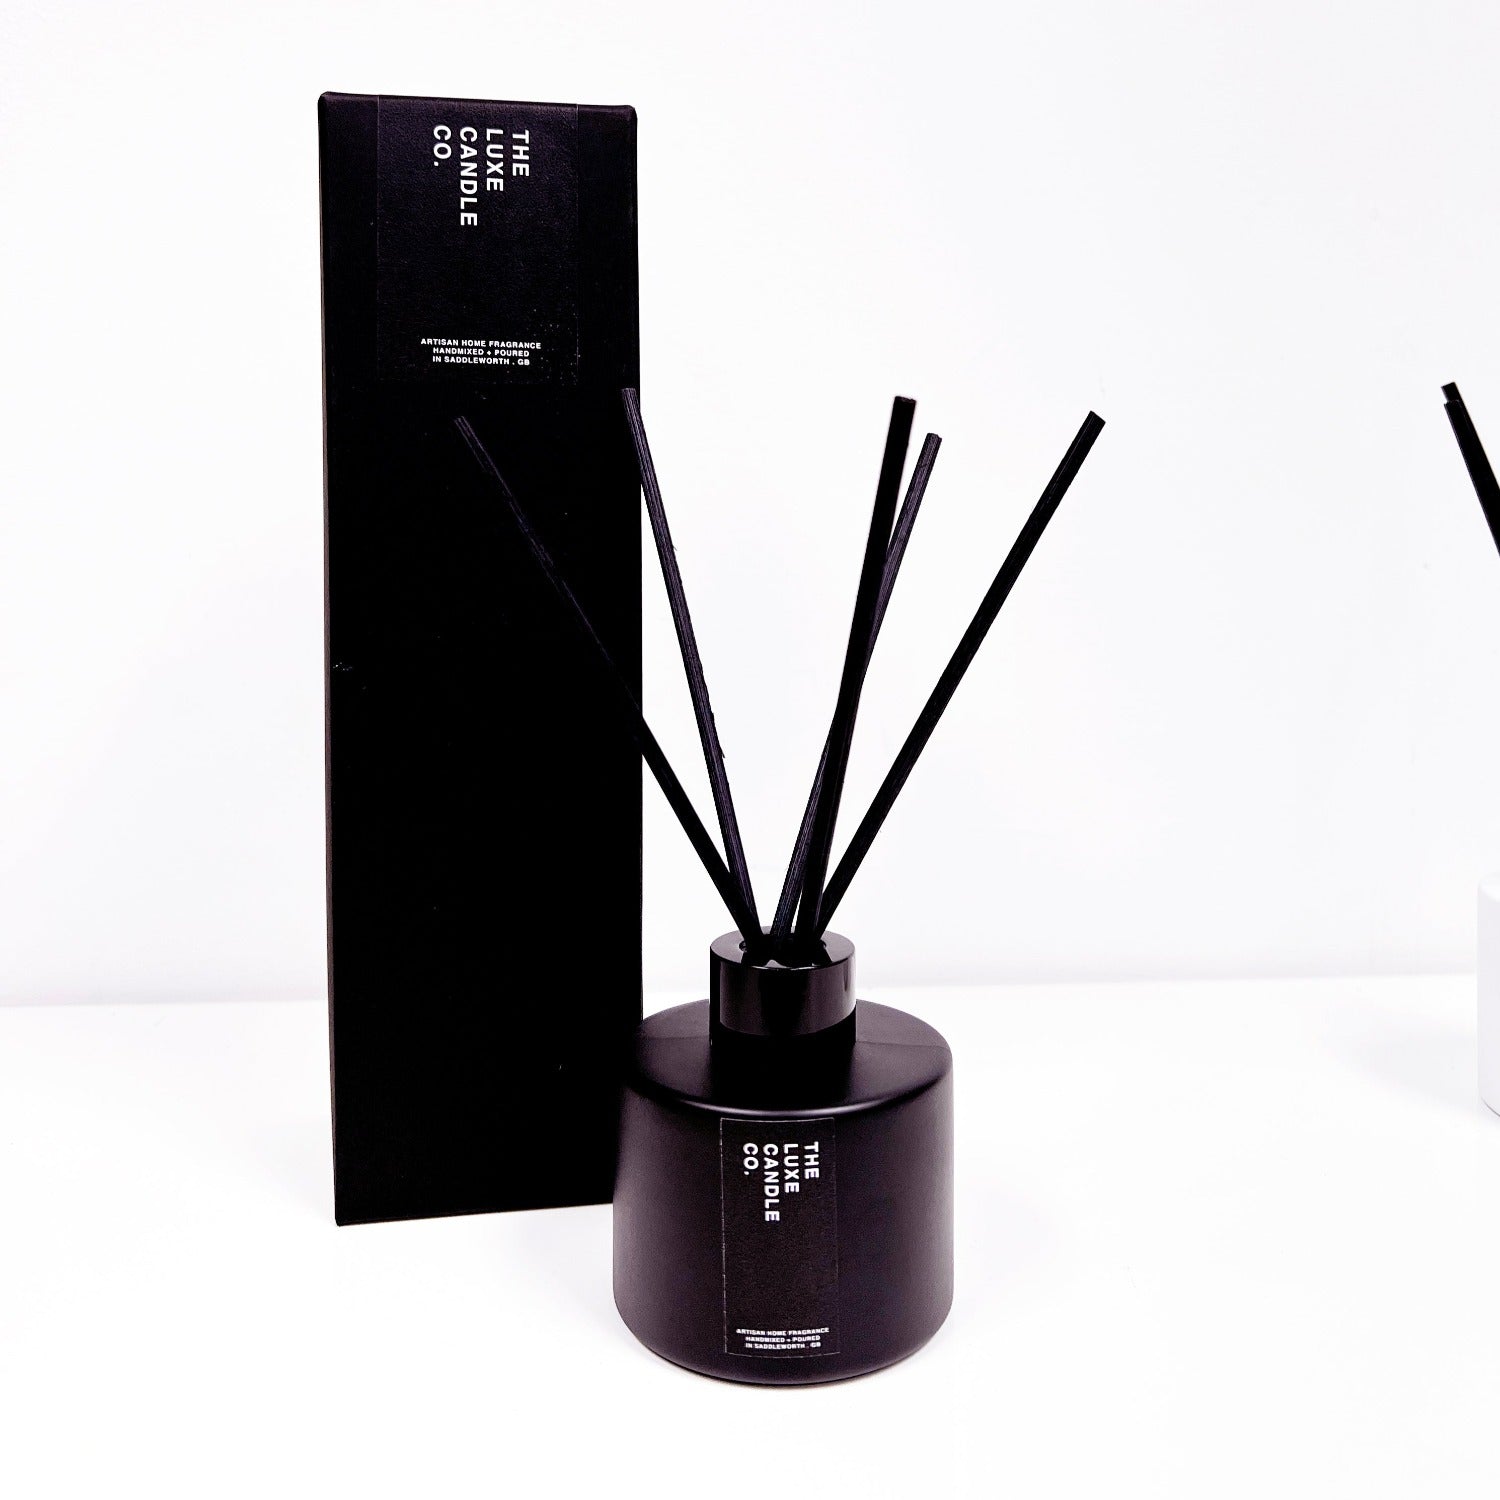 Black reed room fragrance diffuser for black interiors stylish homes. Interior designers favourites